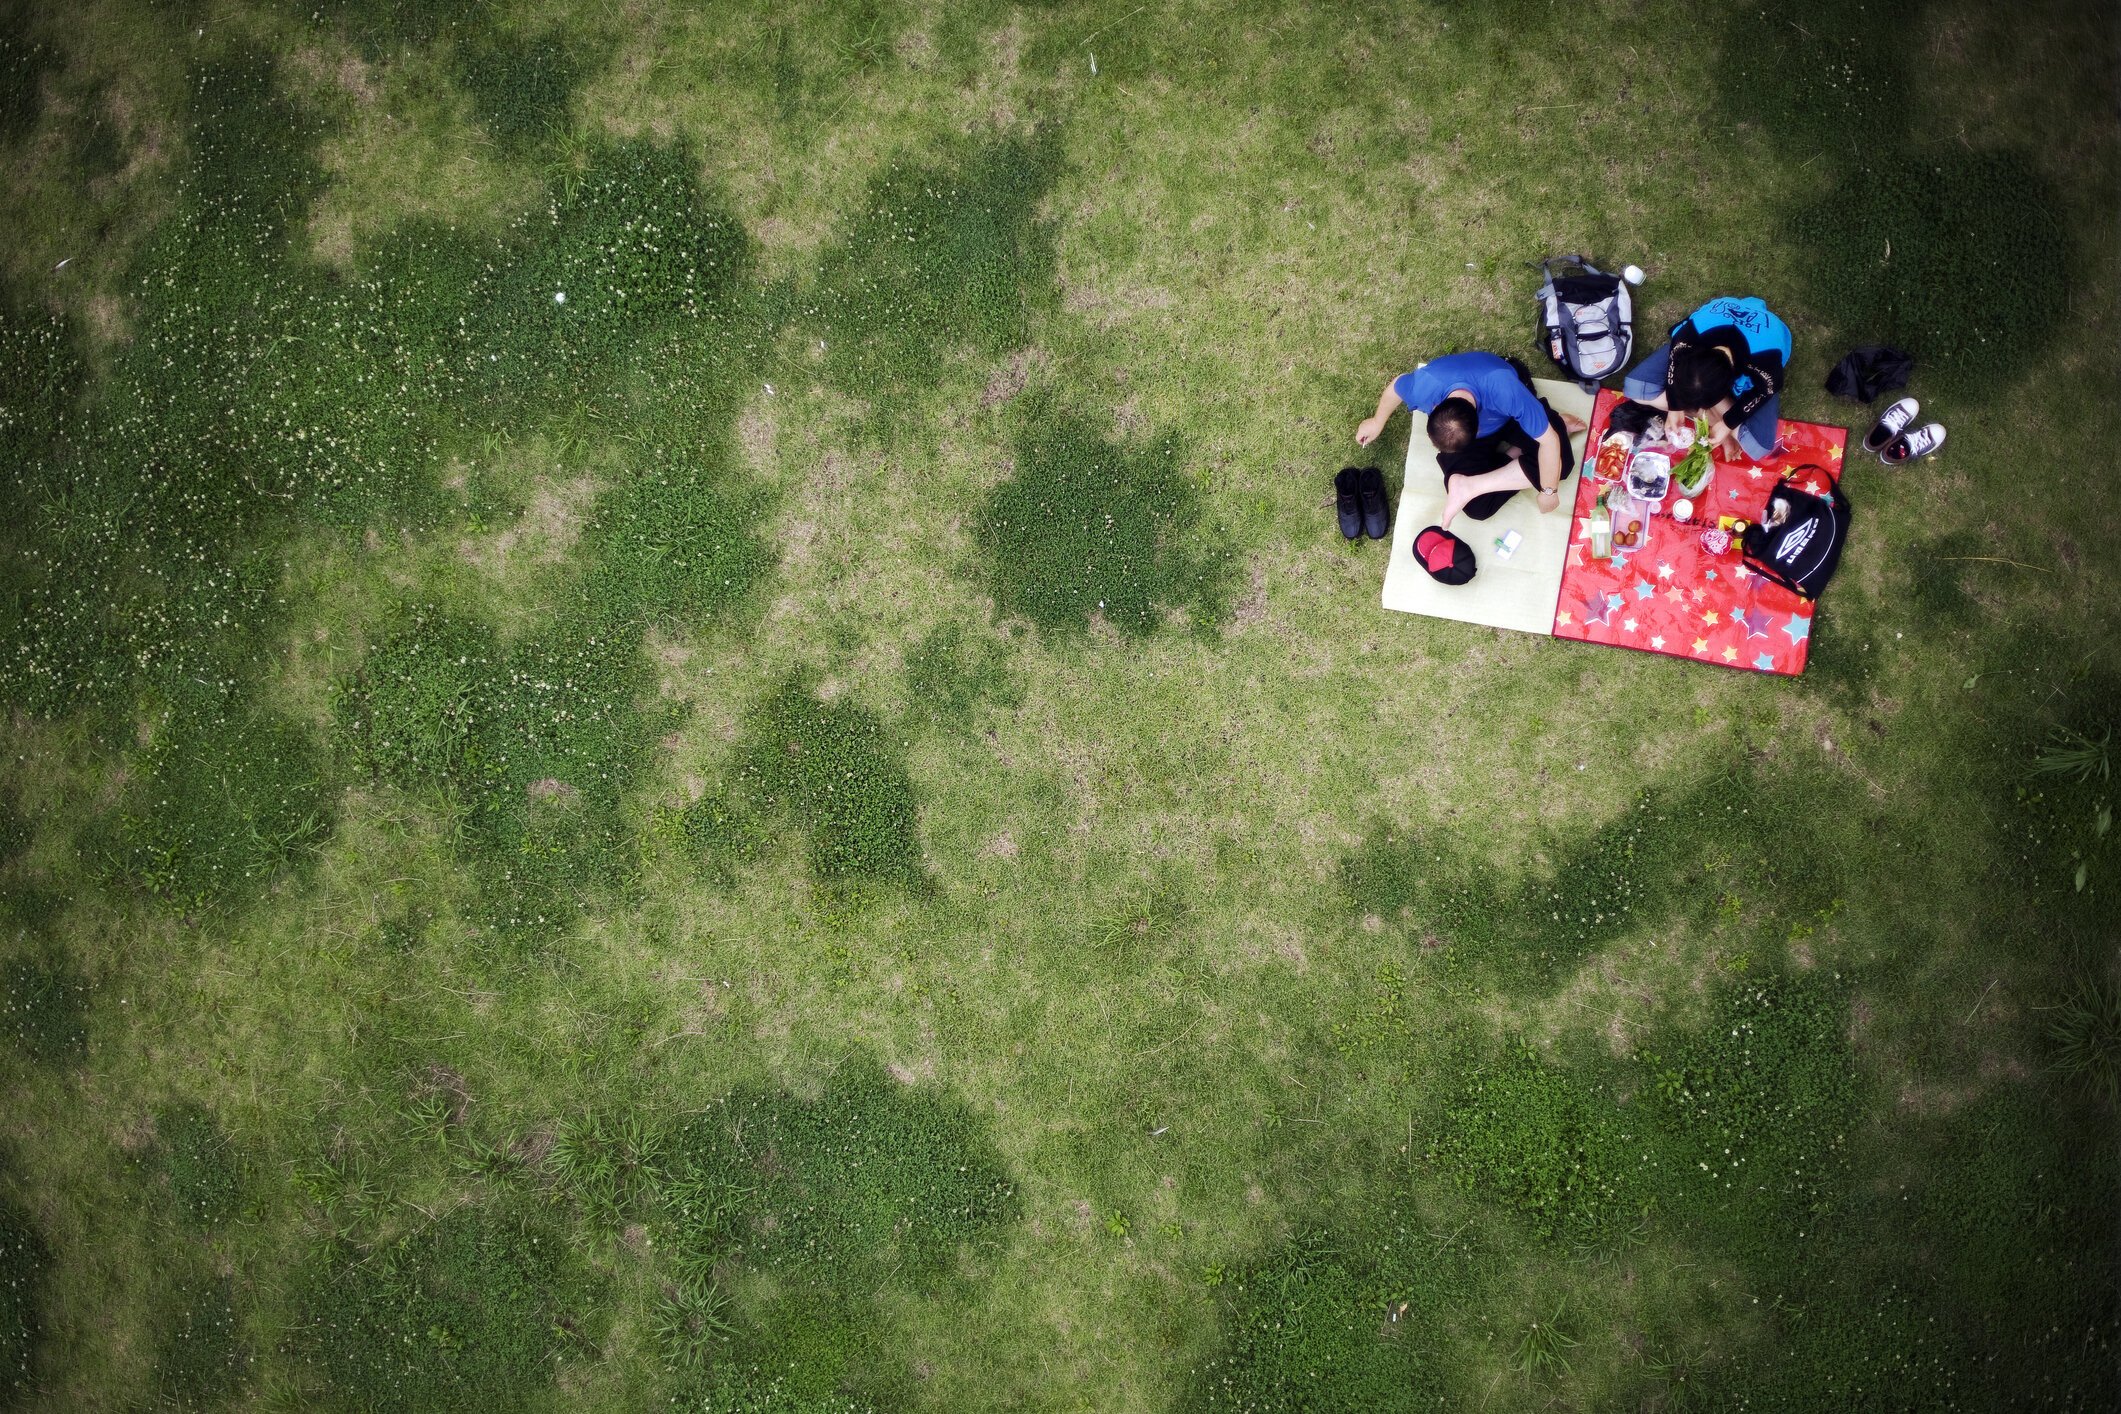 How To Have a Socially-Distanced Picnic